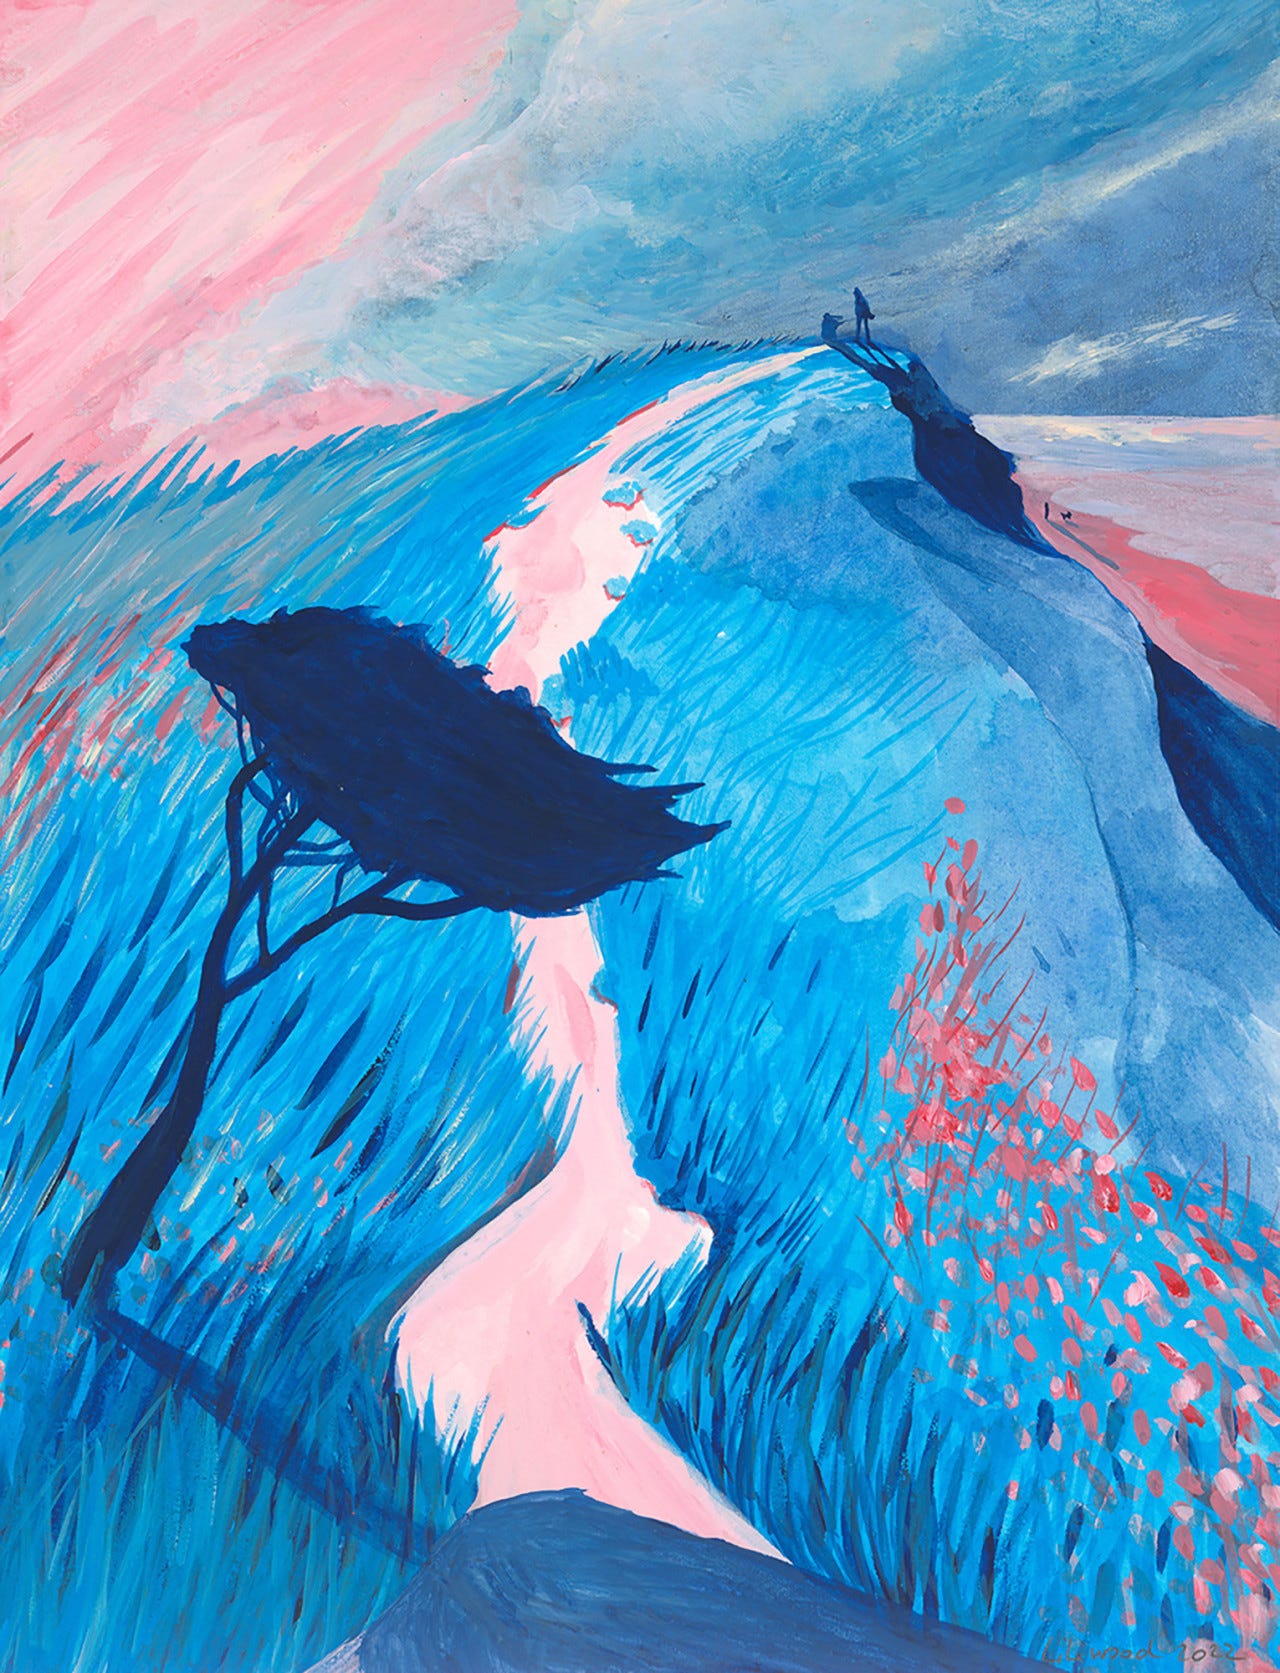 blue and pink artwork of a path leading up a hill, with two small figures near the top, one standing and the other crouching